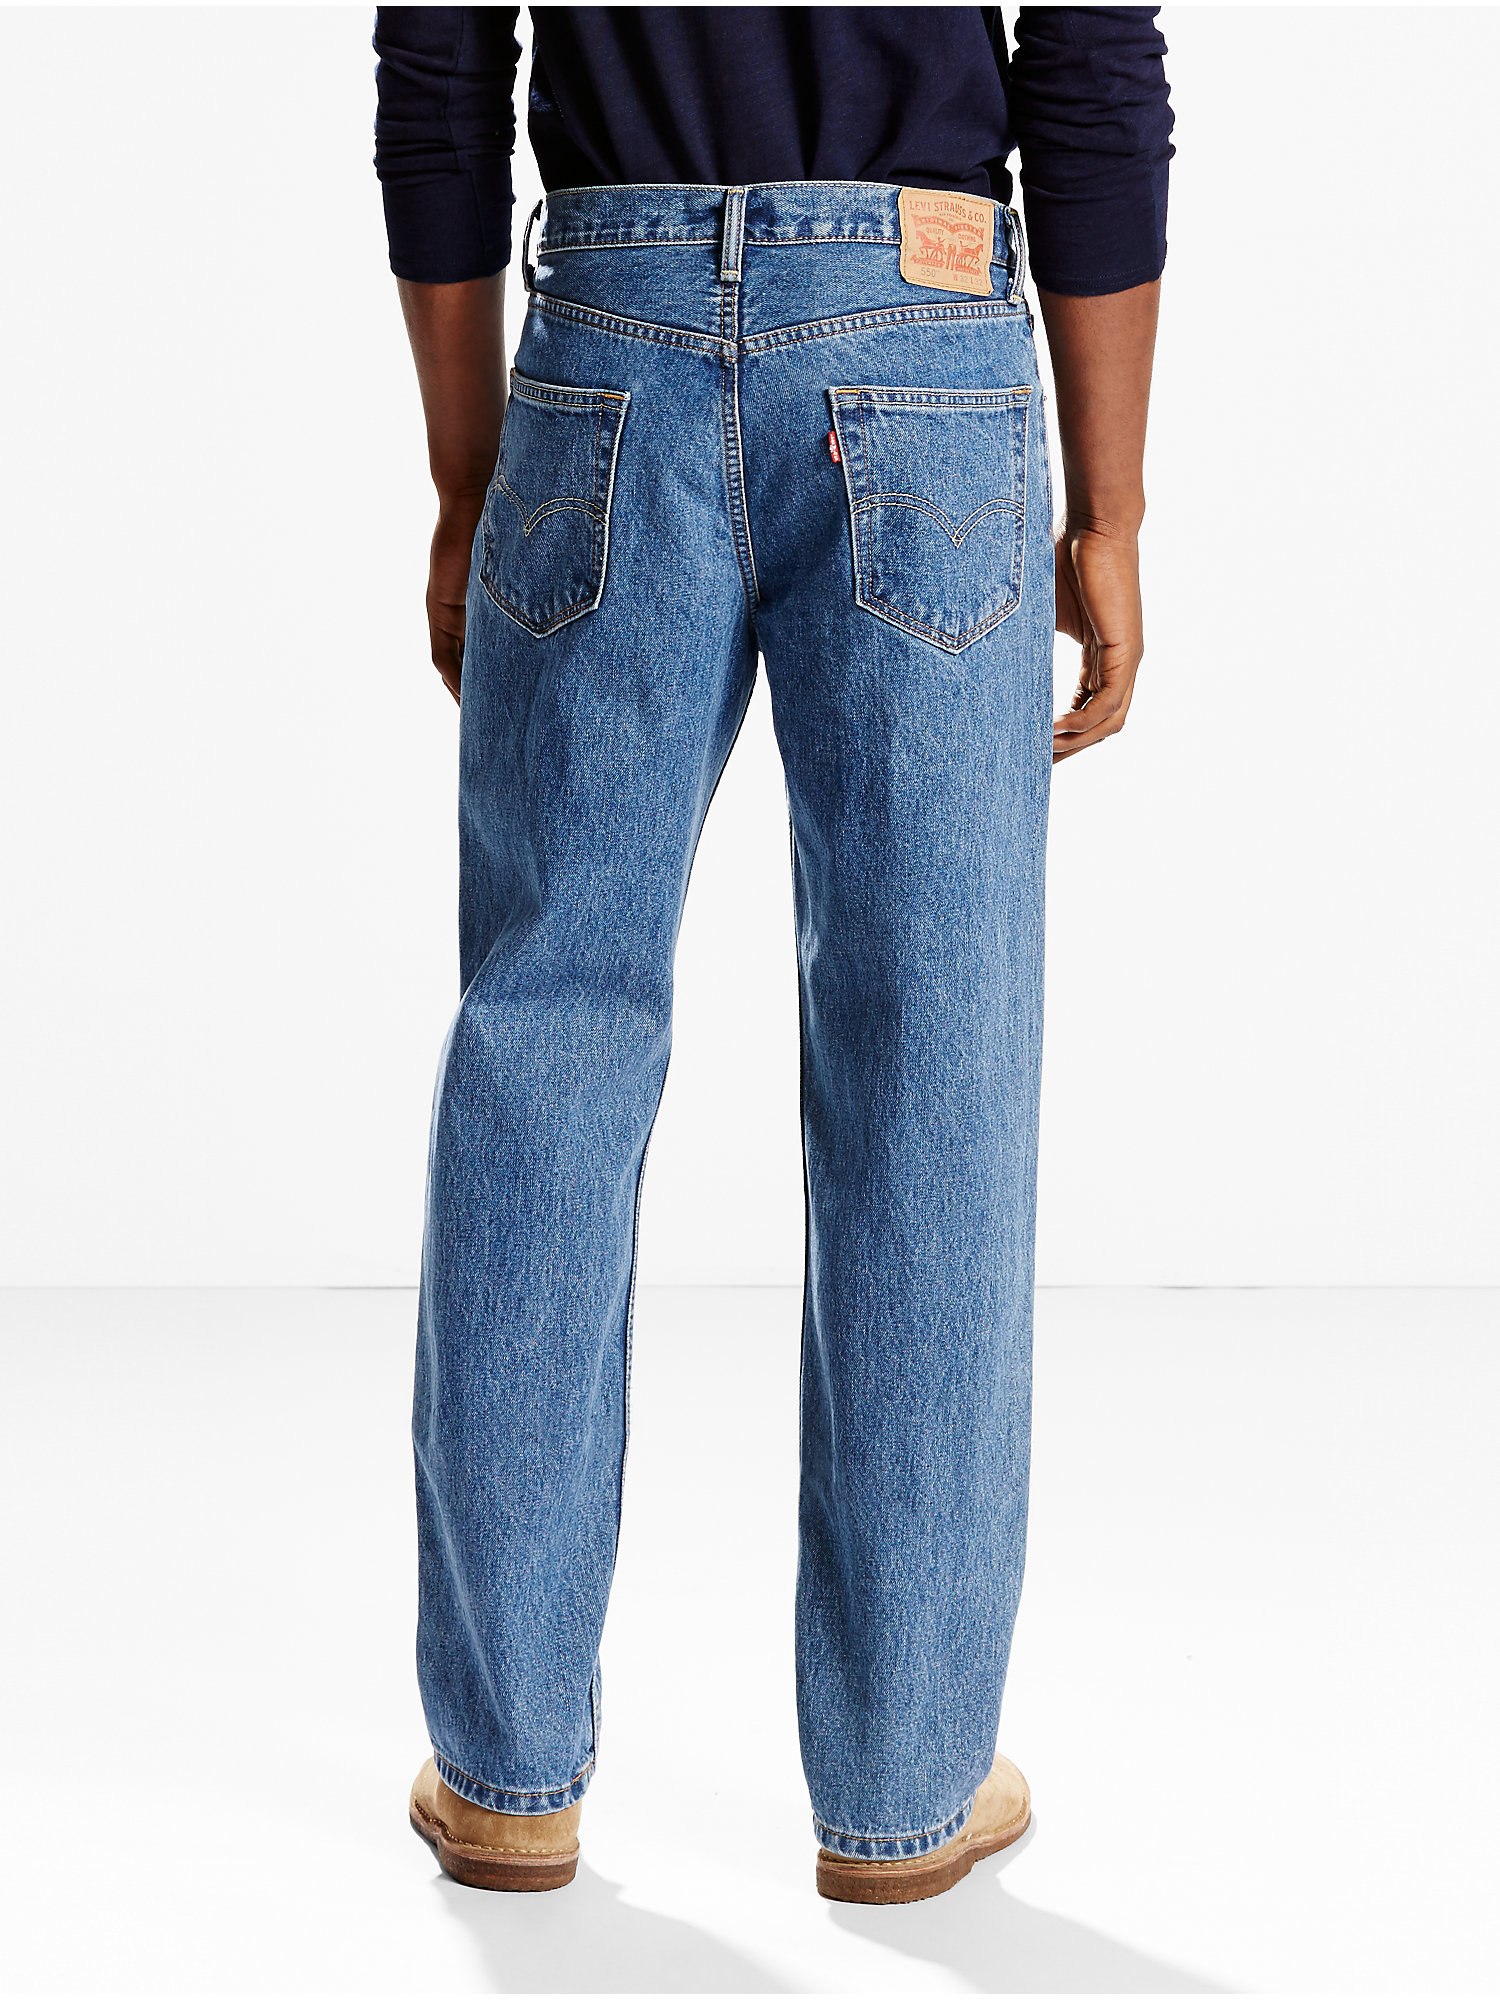 Levi's Men's Big & Tall 550 Relaxed Fit Jeans - image 3 of 7